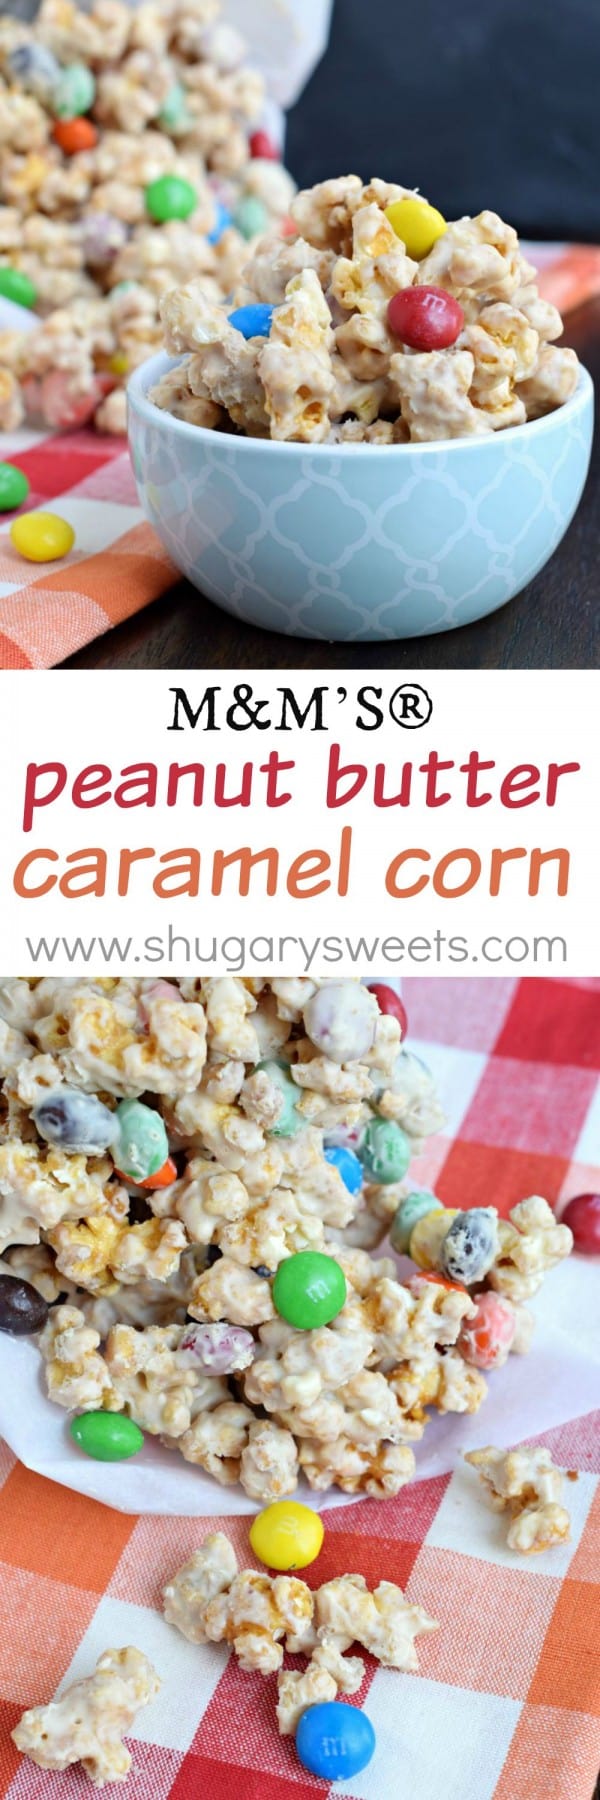 Snack time just got tastier with this homemade M&M'S® Peanut Butter Caramel Corn! Make a batch today!